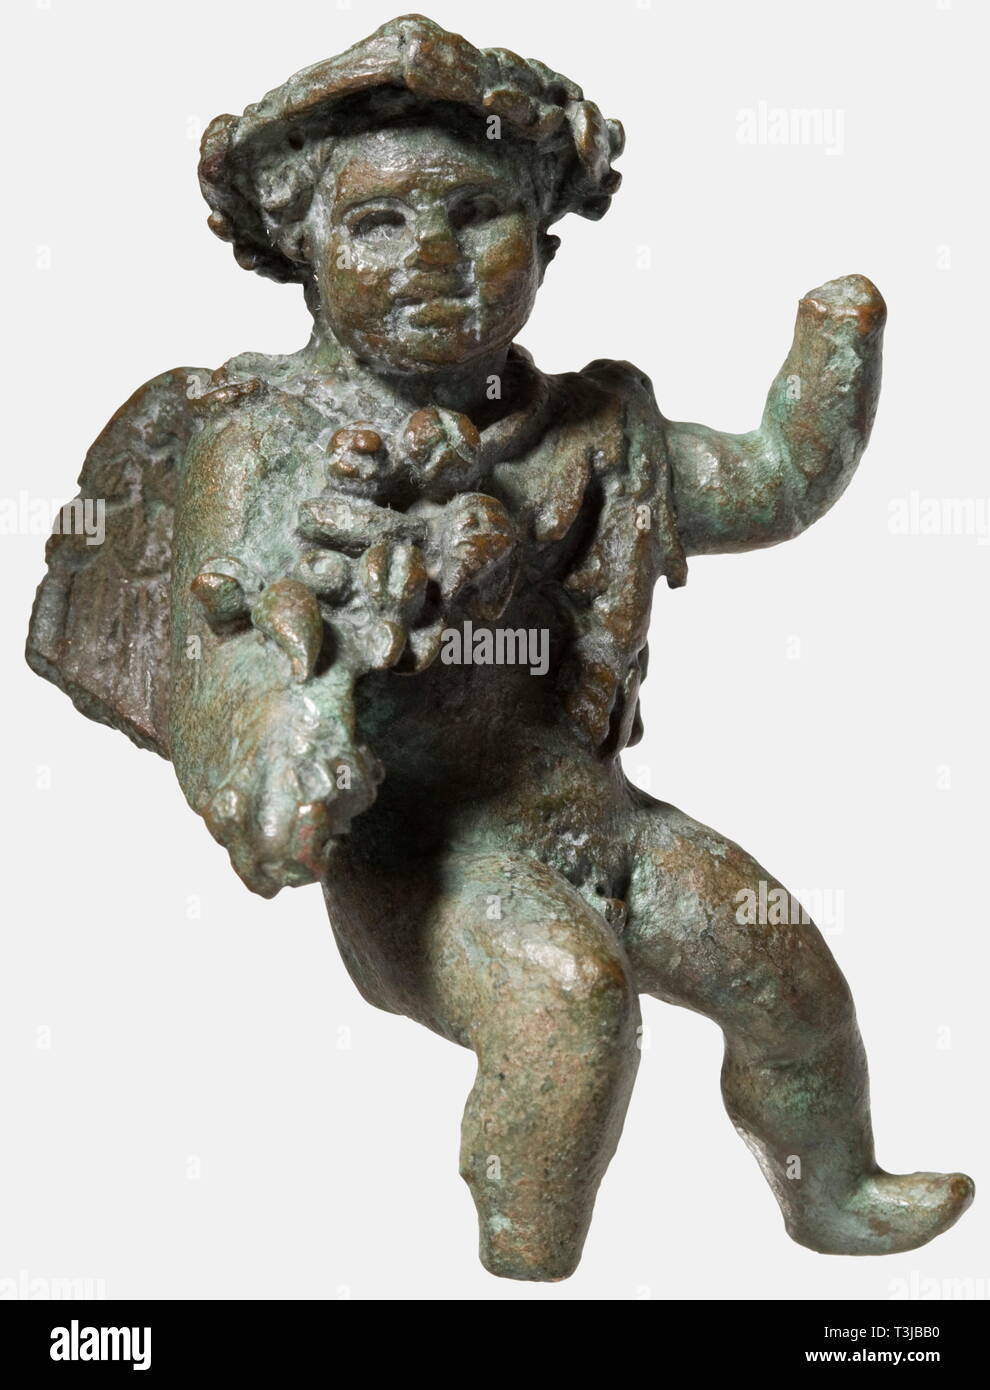 A Roman putto seated in riding position, 1st - 2nd century A.D. Cast bronze complemented by cold-working. The boy was probably originally riding a dolphin, the left arm raised, wearing around his neck a fruit garland, the head crowned with a leaf wreath, the finely modelled head with pierced eyes turned slightly to the left. Fine, dark green patina, the right foot and left hand missing, the wings slightly damaged. Height 7.8 cm. A well-crafted small bronze figure of Roman origin. Provenance: German private collection, 1970s. historic, historical,, Additional-Rights-Clearance-Info-Not-Available Stock Photo